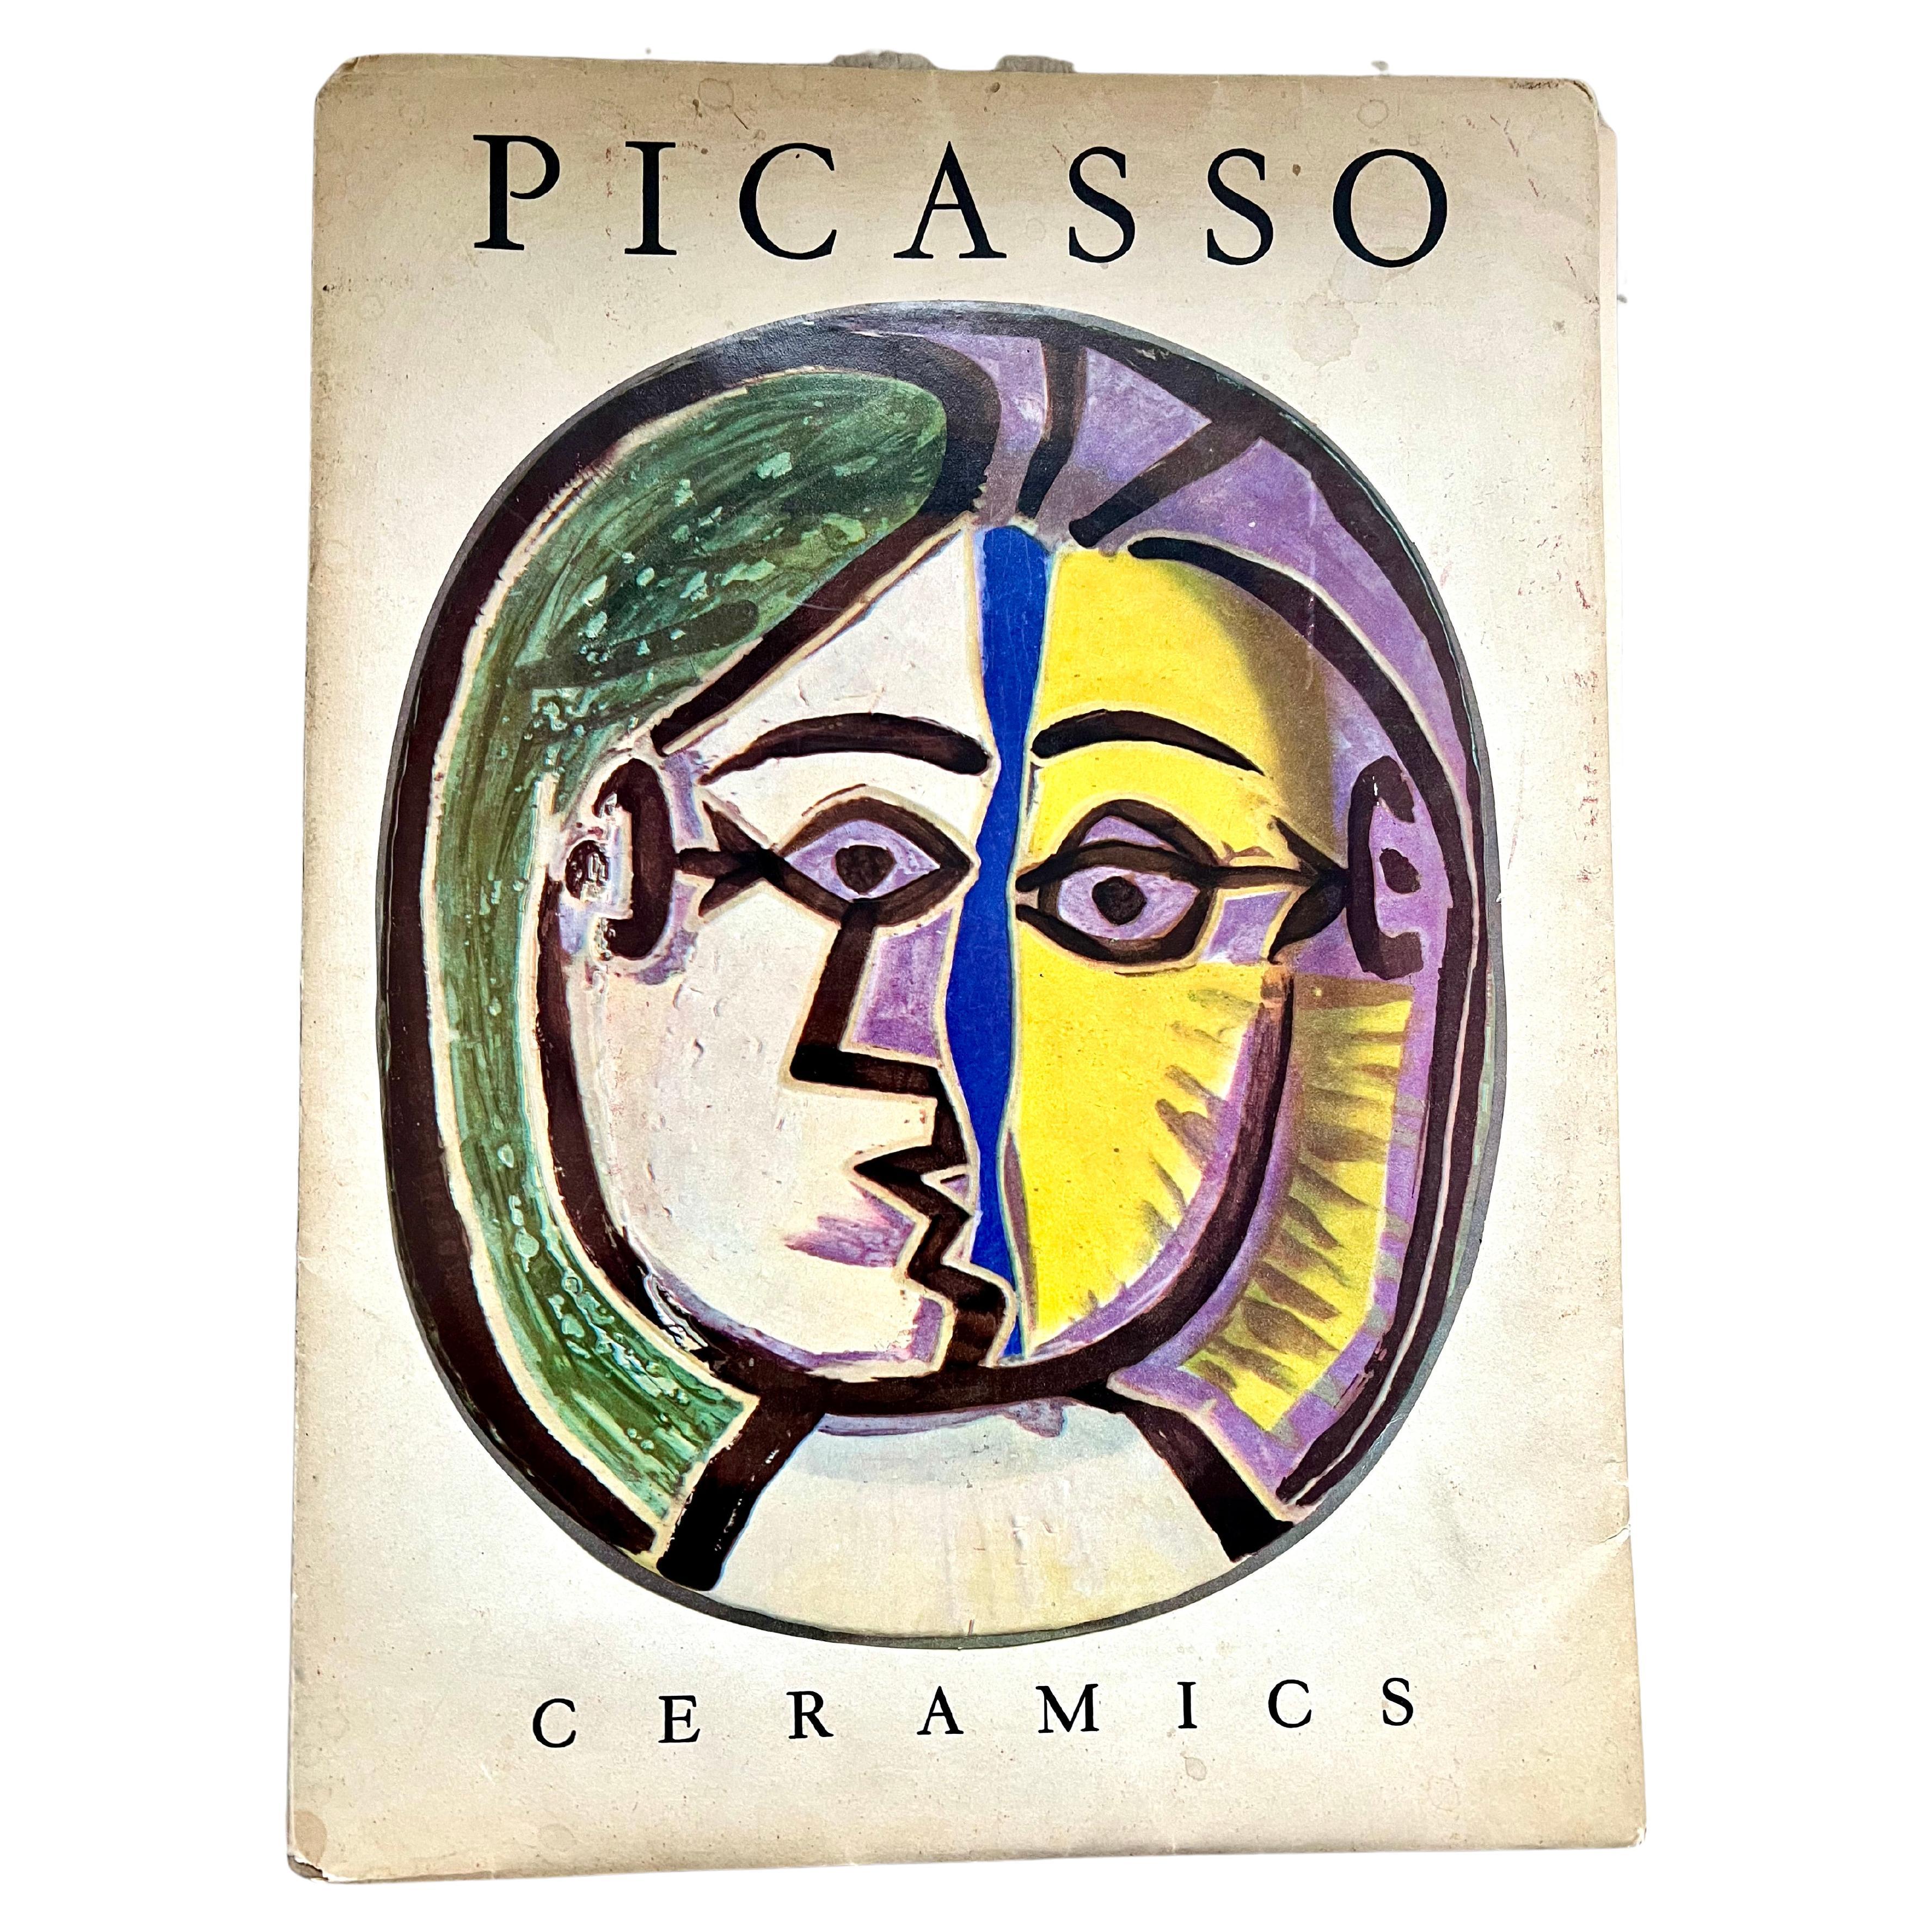 Pablo Picasso ceramics.
First edition, published by Albert Skira, Geneva 10 July 1950.

15 (14 inside, 1 on the cover) tipped-in photographs of Picasso ceramics. The prints are cut to the shape of the ceramic, with a glossy finish to mimic the